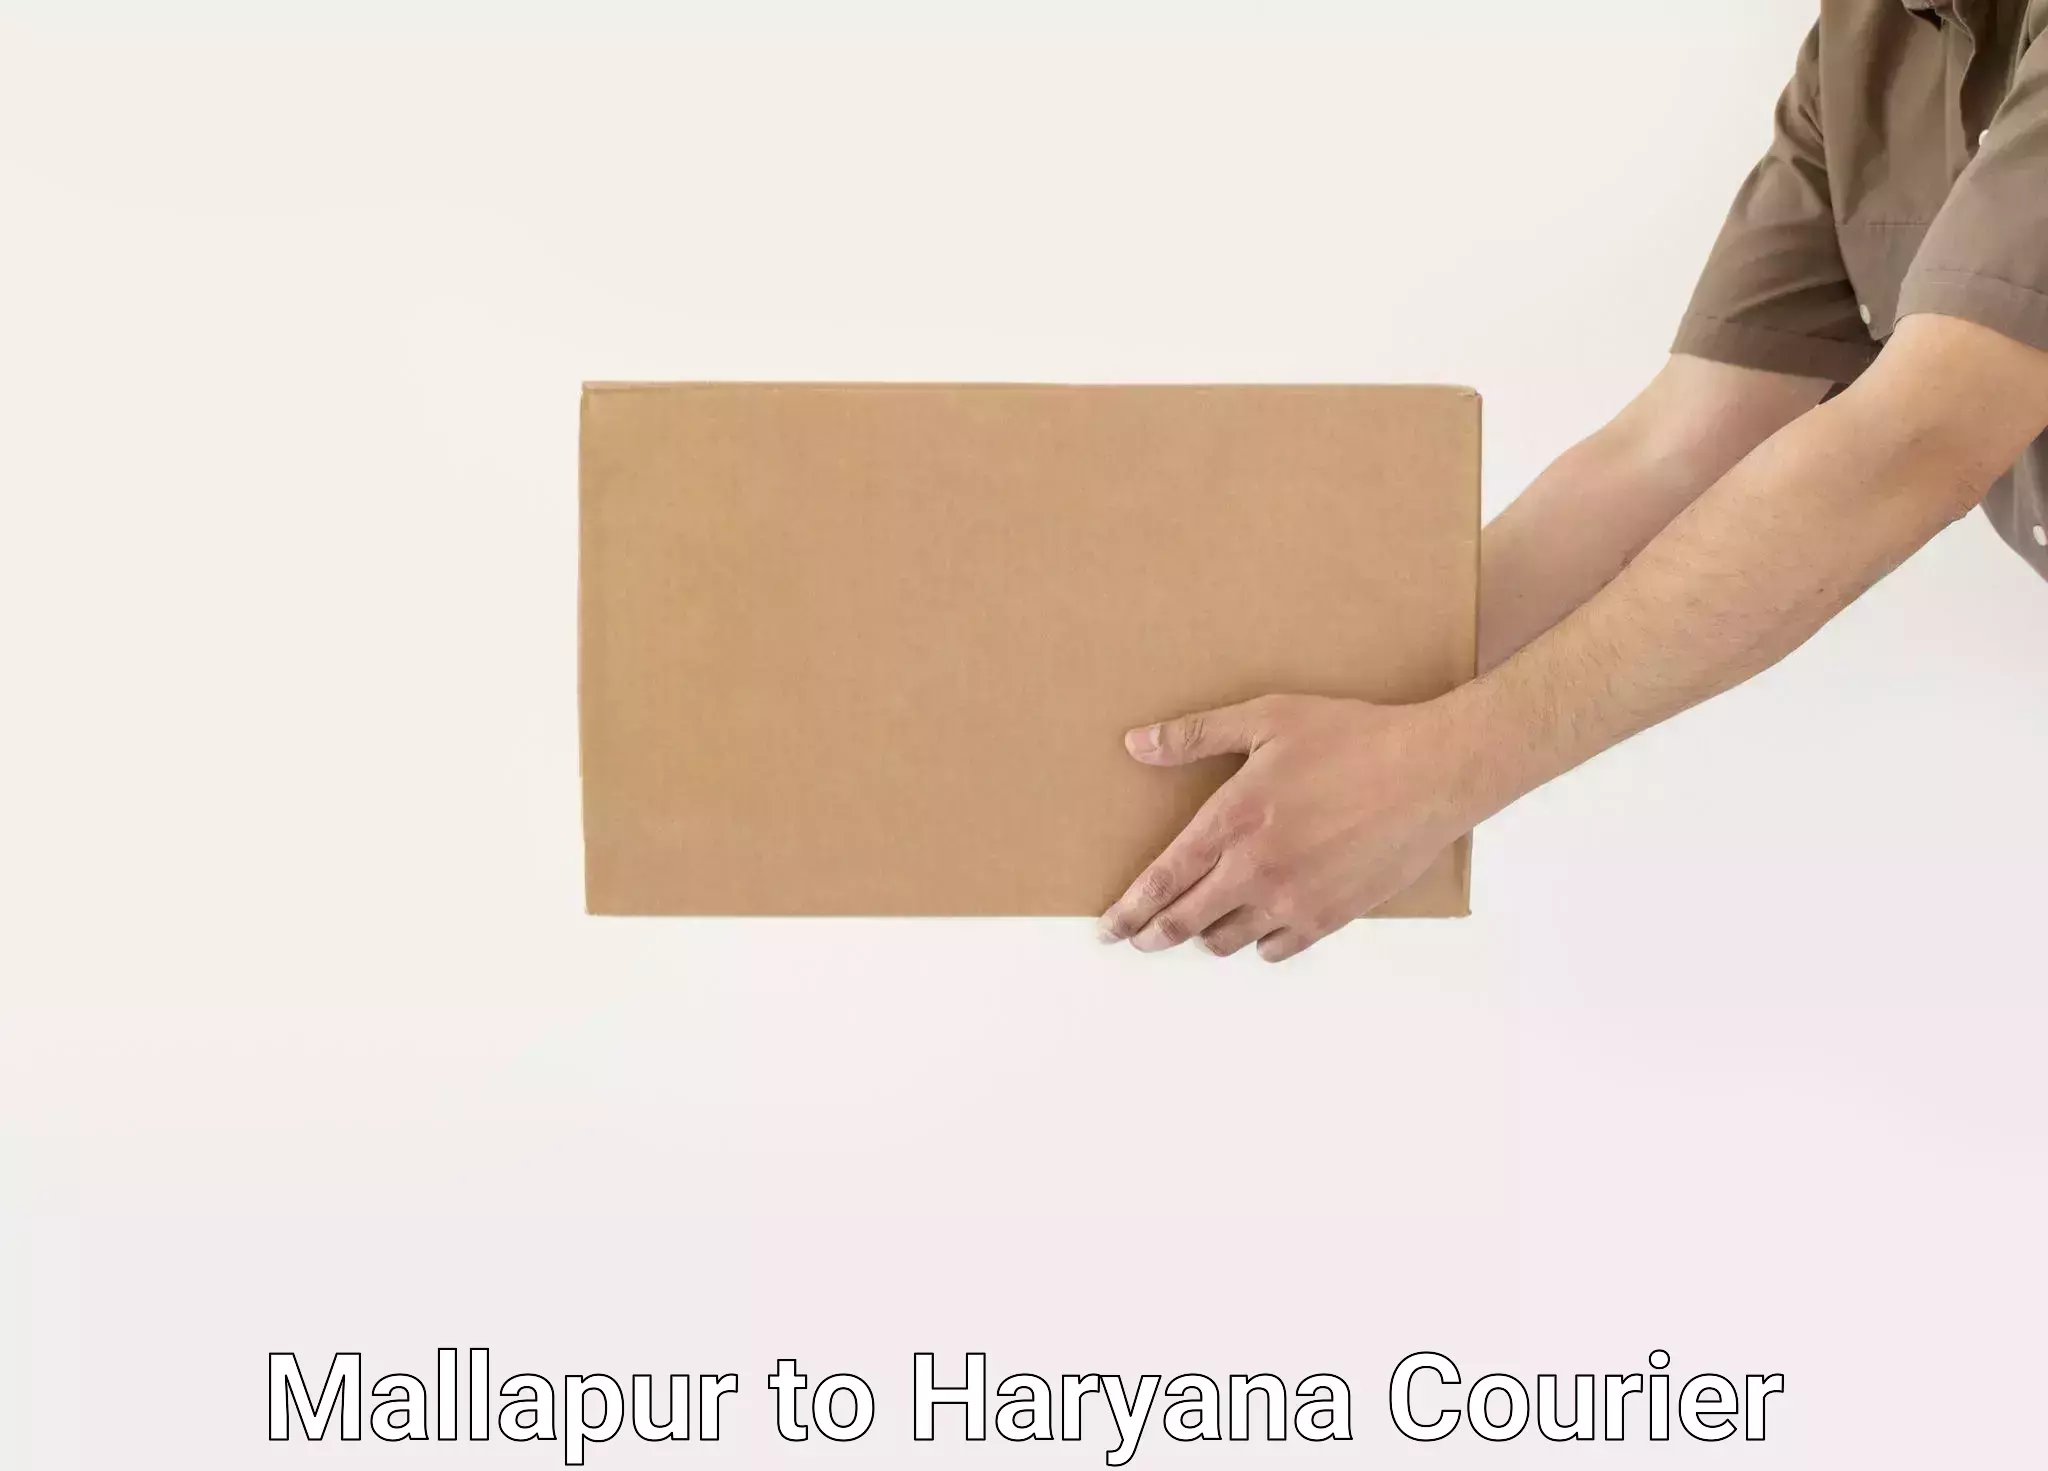 Moving and handling services in Mallapur to Gurgaon